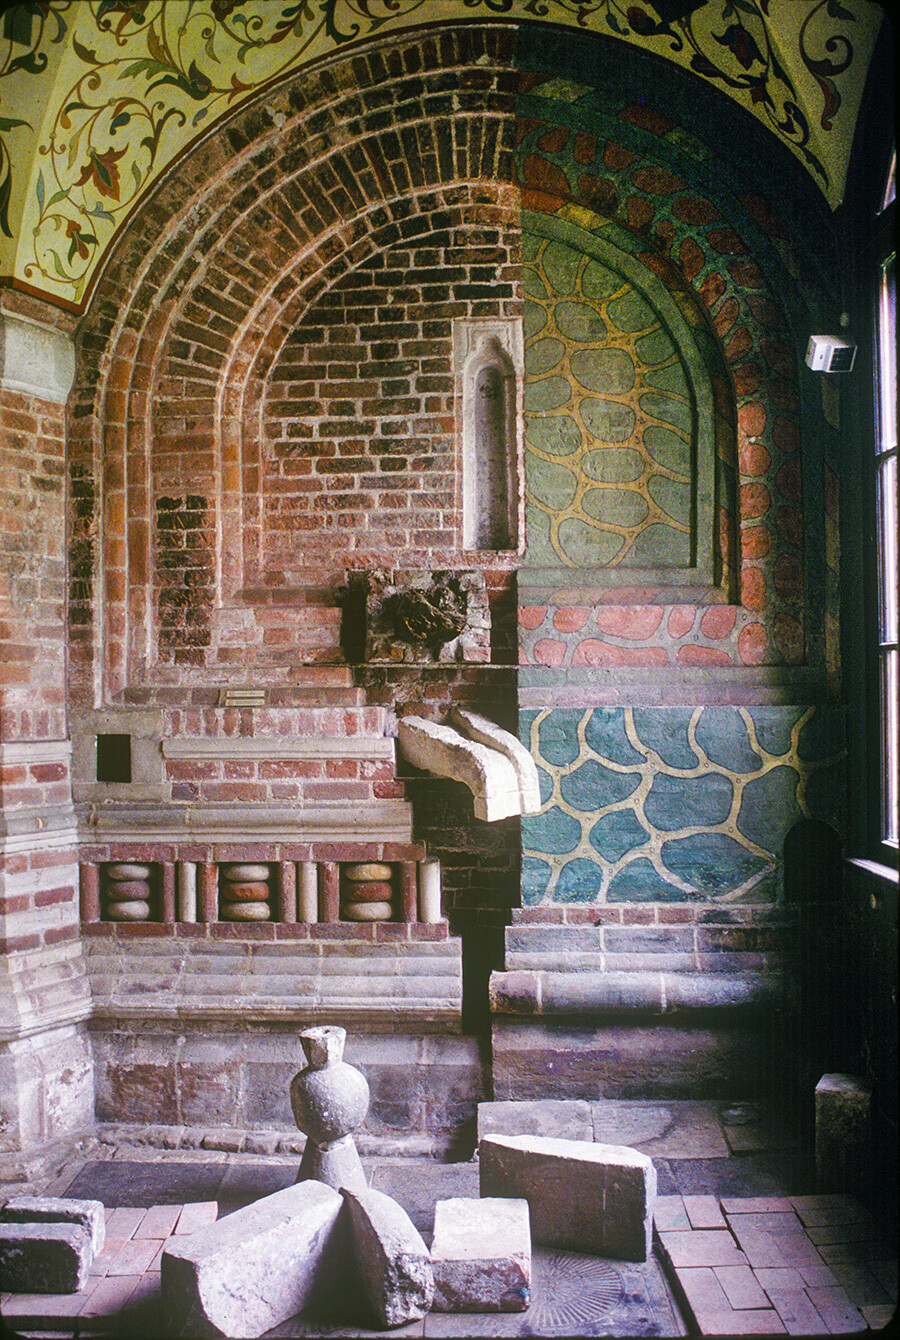 St. Basil's. Ground level passage with display of construction artifacts & different layers of wall decoration from 16th- 19th centuries. June 21, 1994.